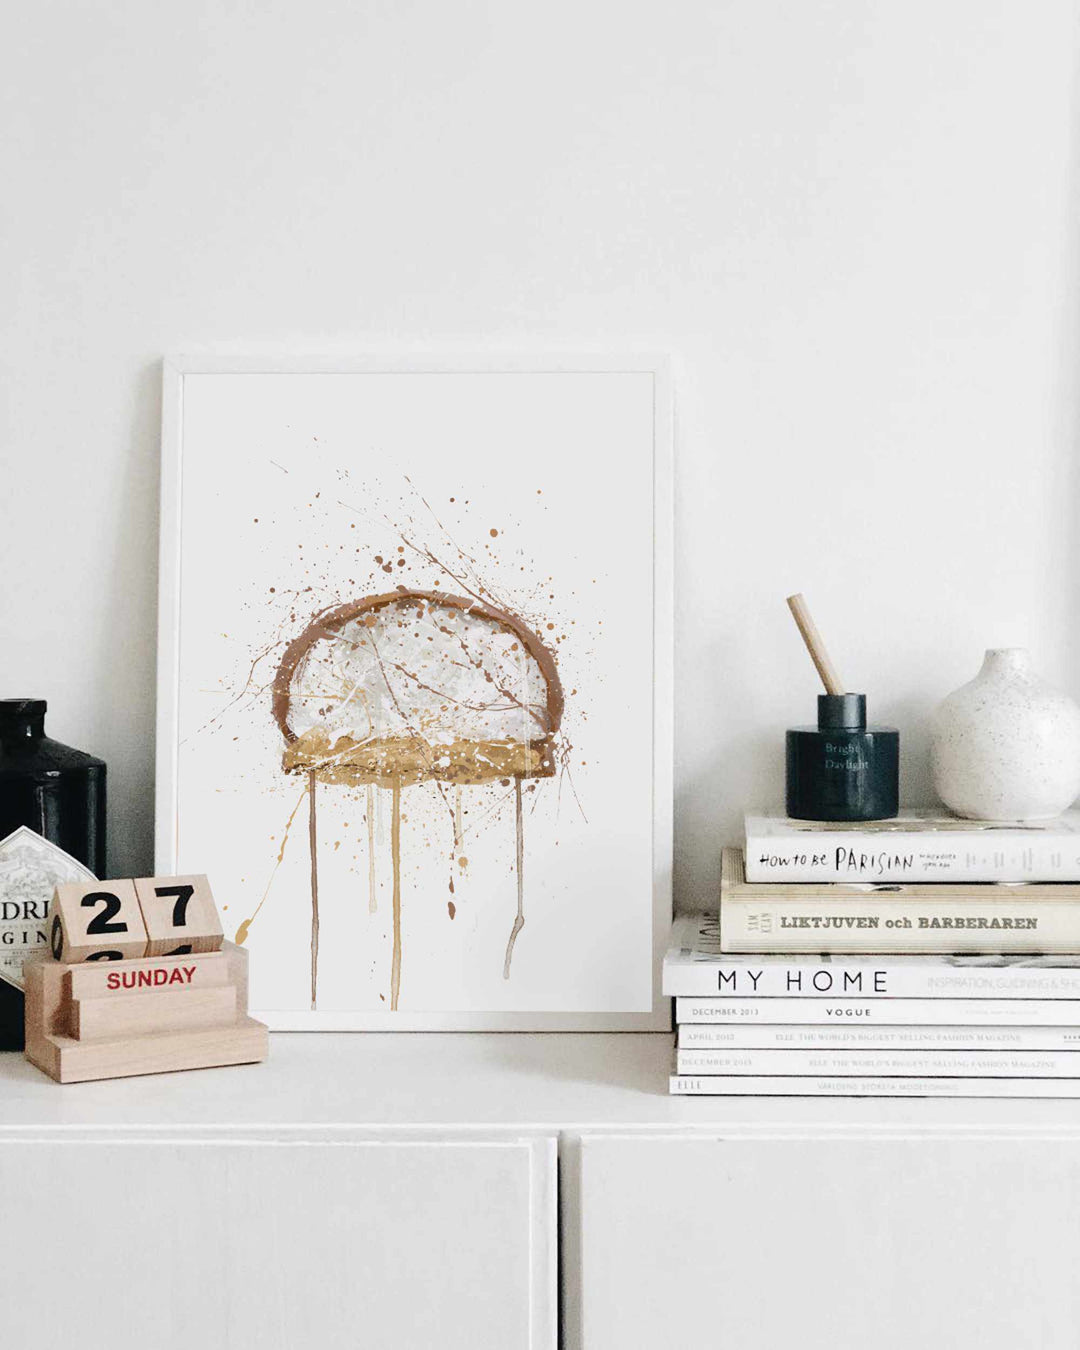 Cake Wall Art Print 'Mallow Biscuit'